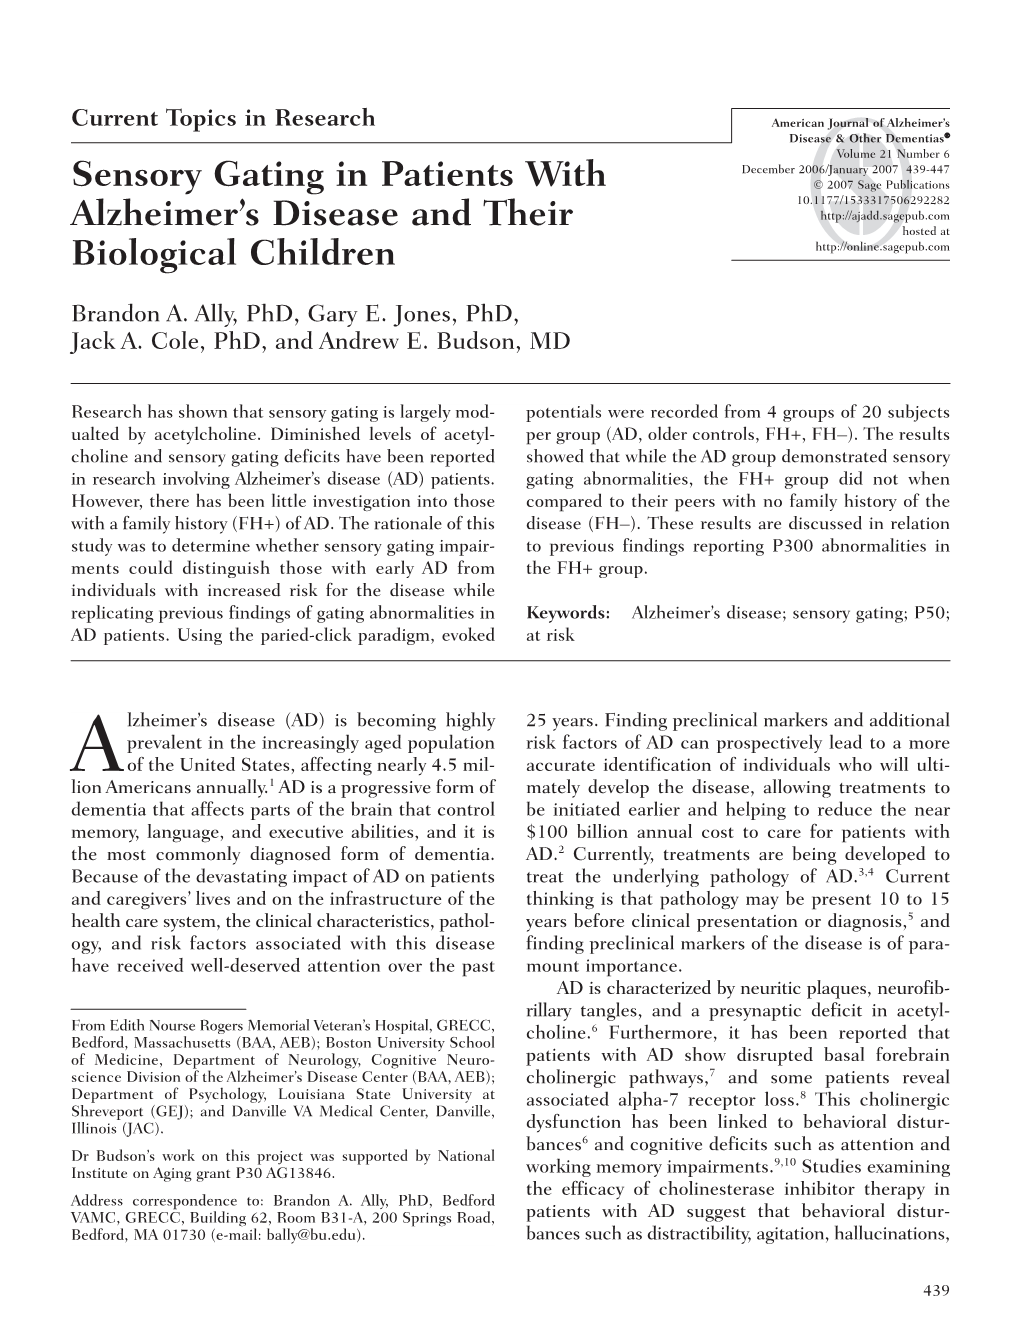 Sensory Gating in Patients with Alzheimer's Disease and Their Biological Children